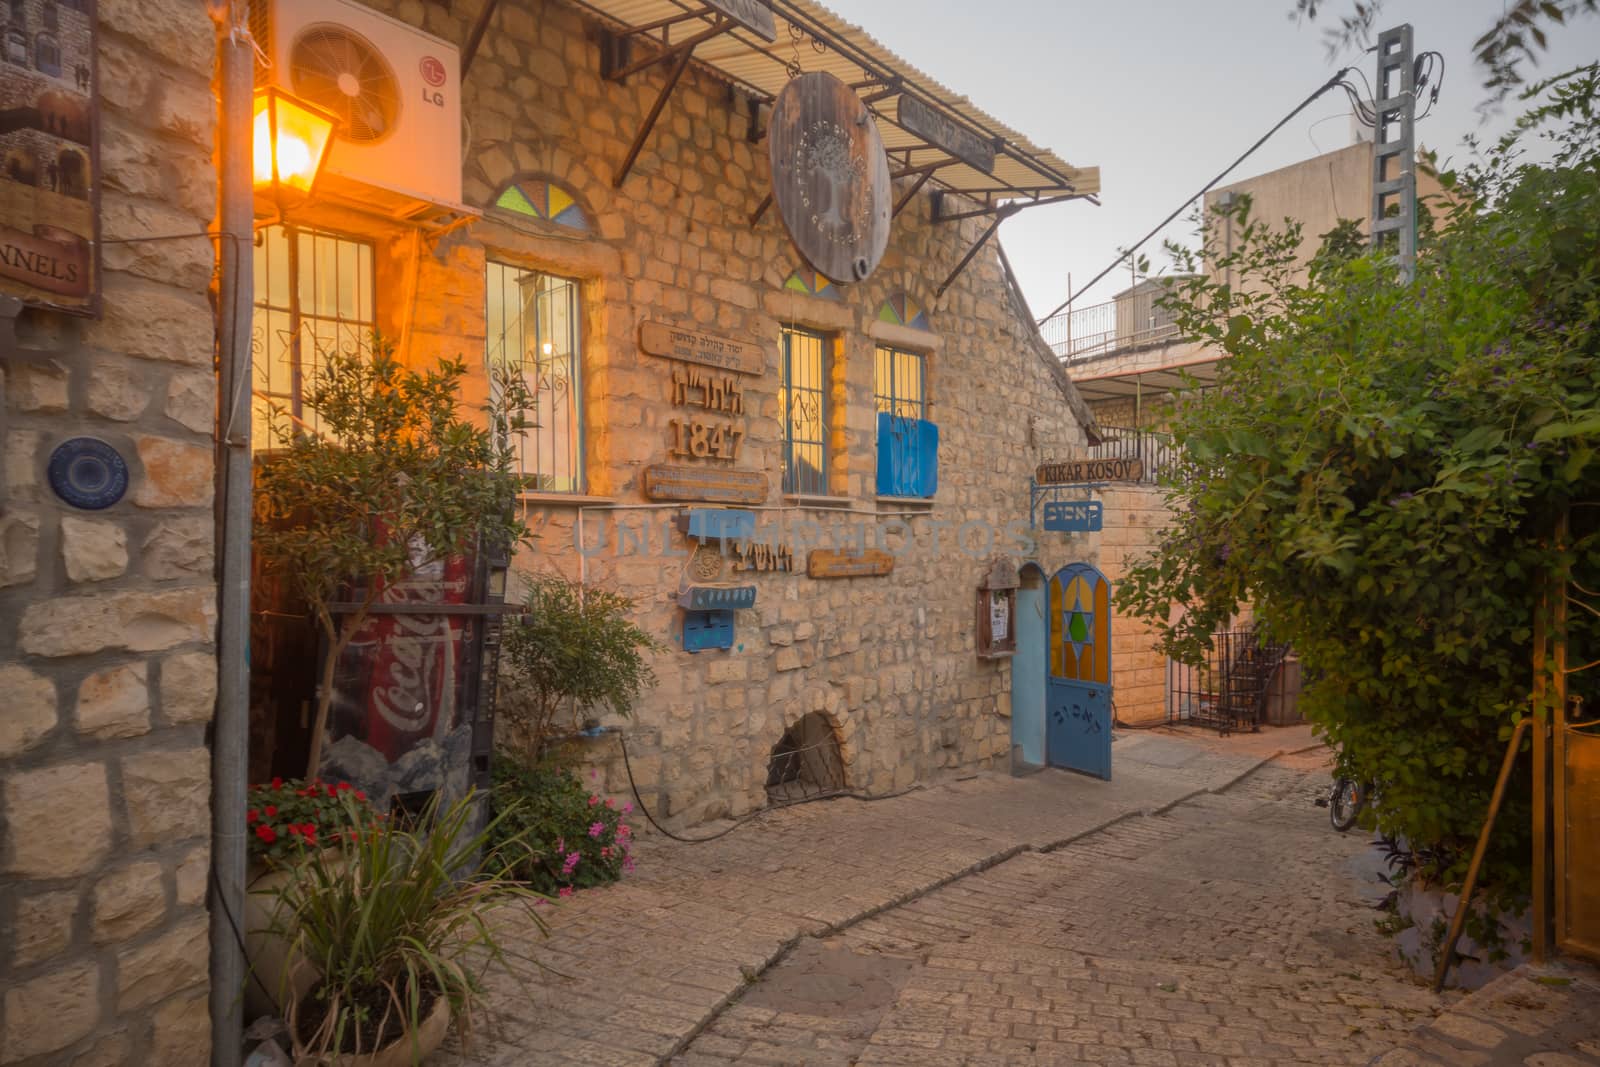 SAFED, ISRAEL - SEPTEMBER 14, 2016: An alley in the Jewish quarter of the old city, with various signs, in Safed (Tzfat), Israel